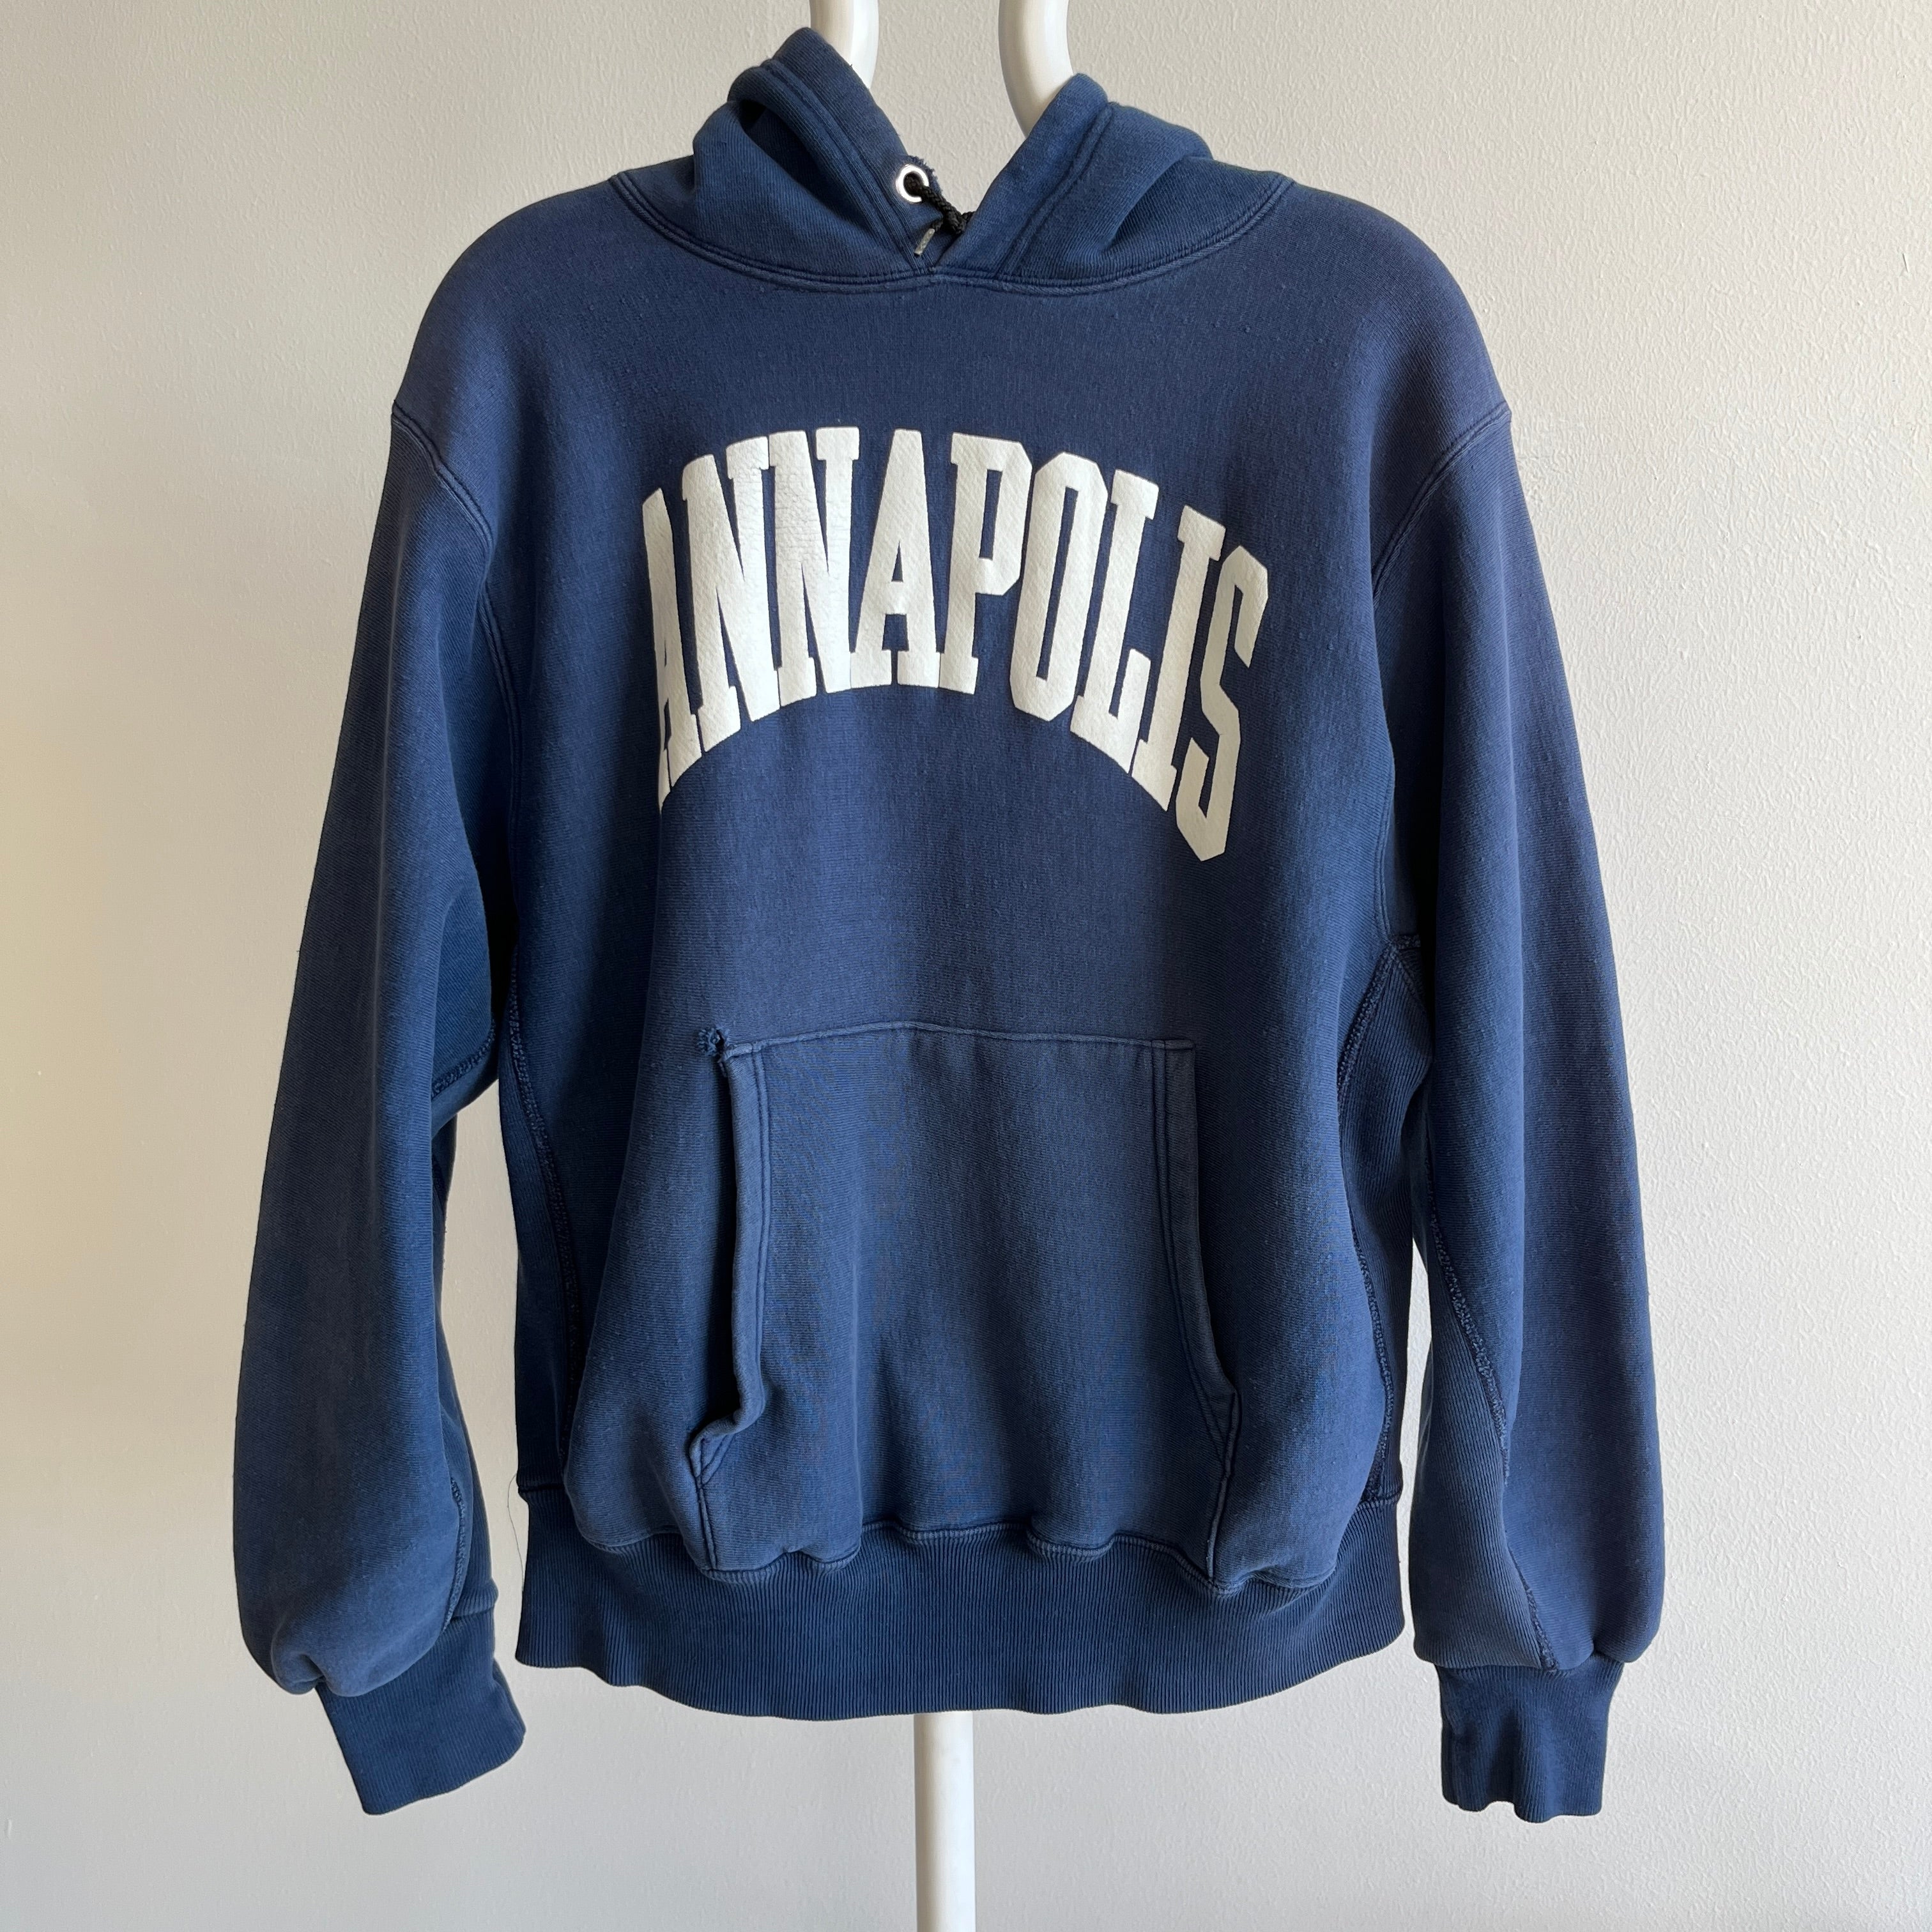 1980s Annapolis Naval Academy Reverse Weaver Soft and Slouchy Sun Faded Hoodie - THIS IS GOLD